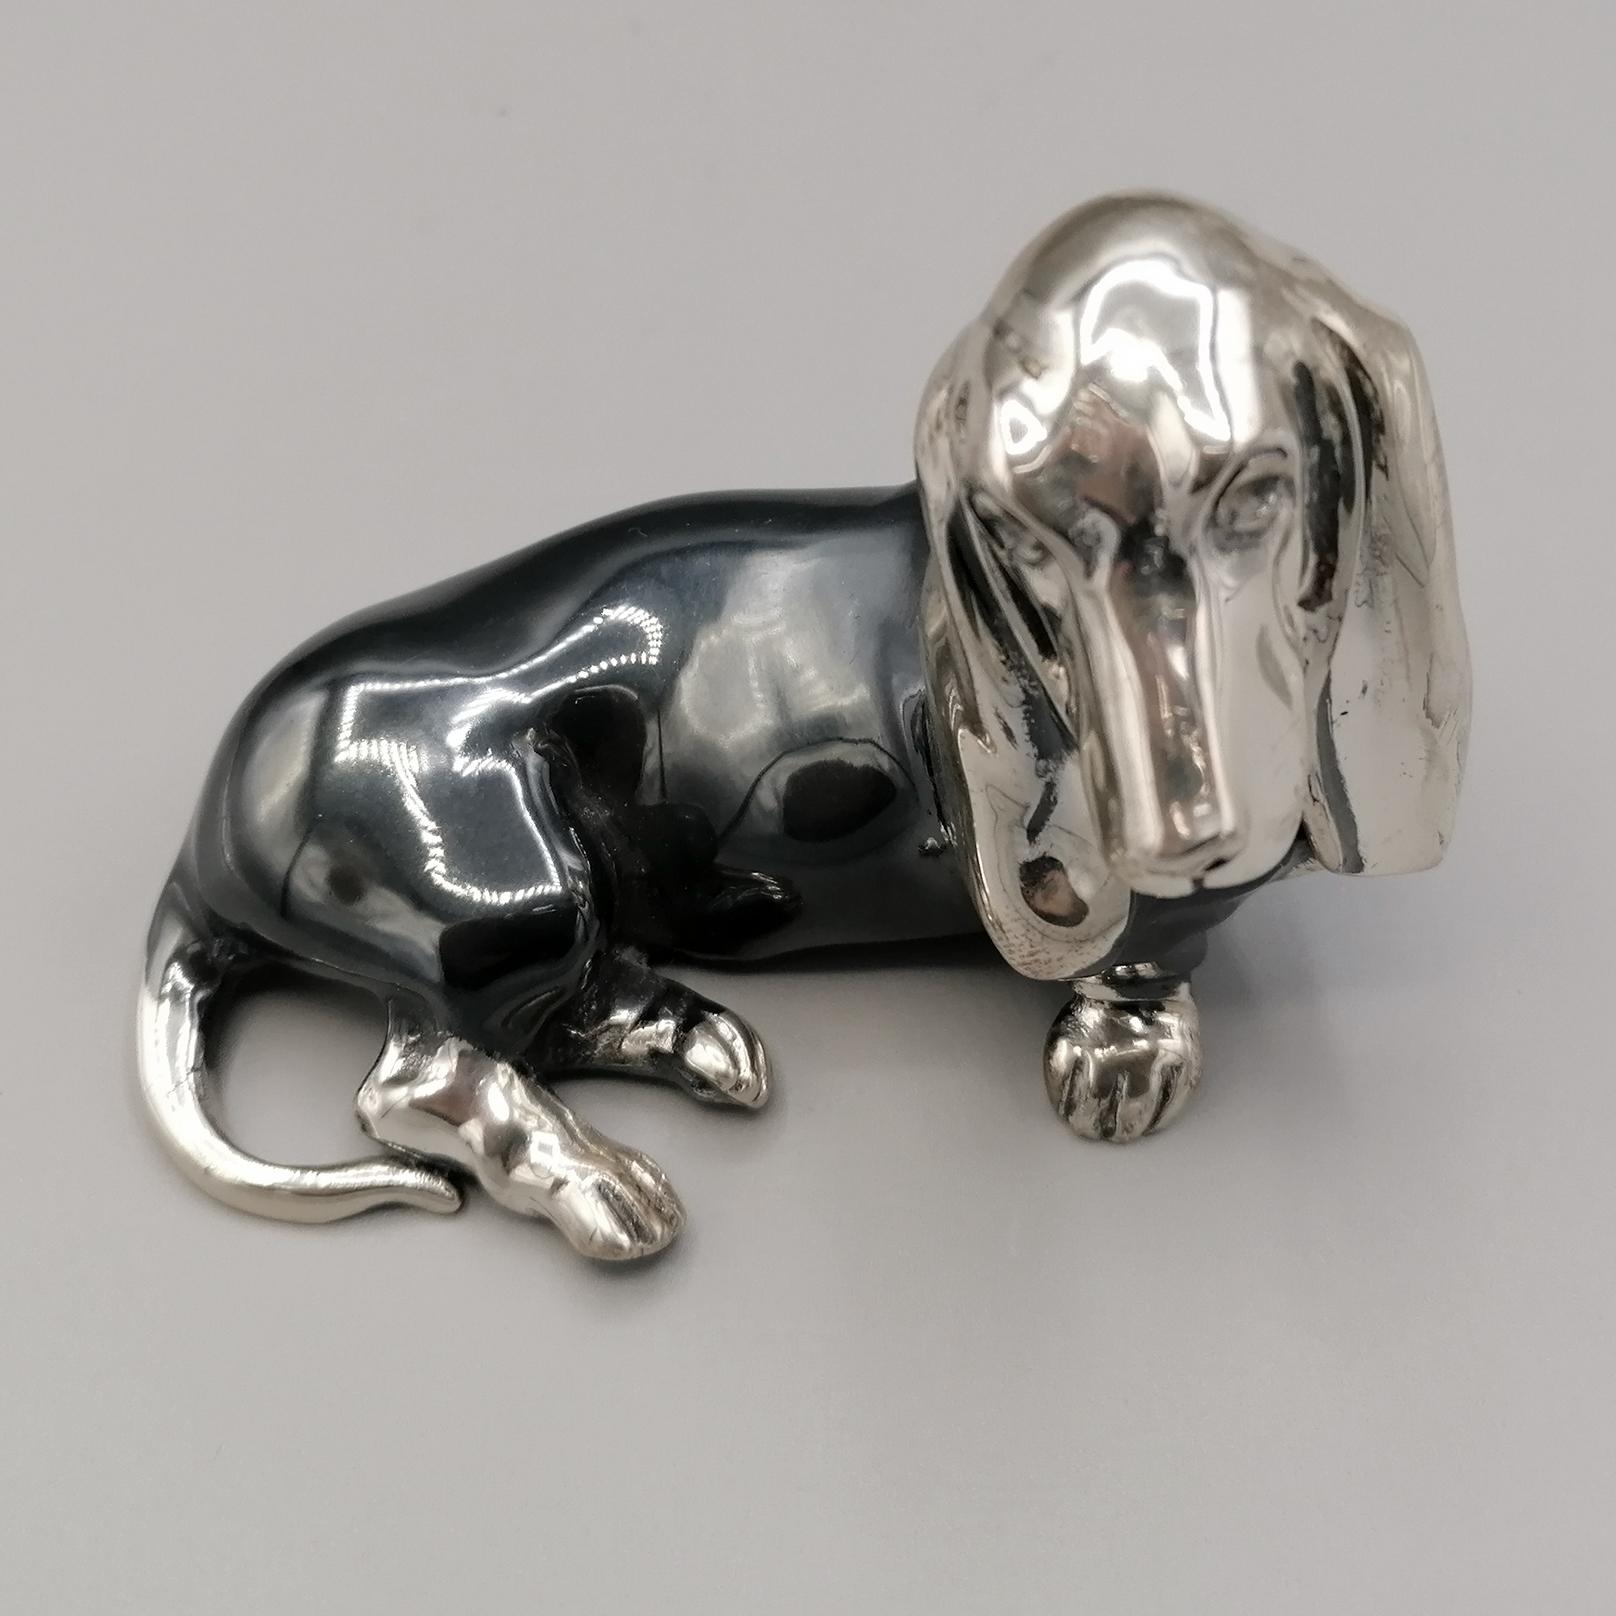 Italian 20th Century Solid Silver Sculture Depicting a Basset Hound Dog For Sale